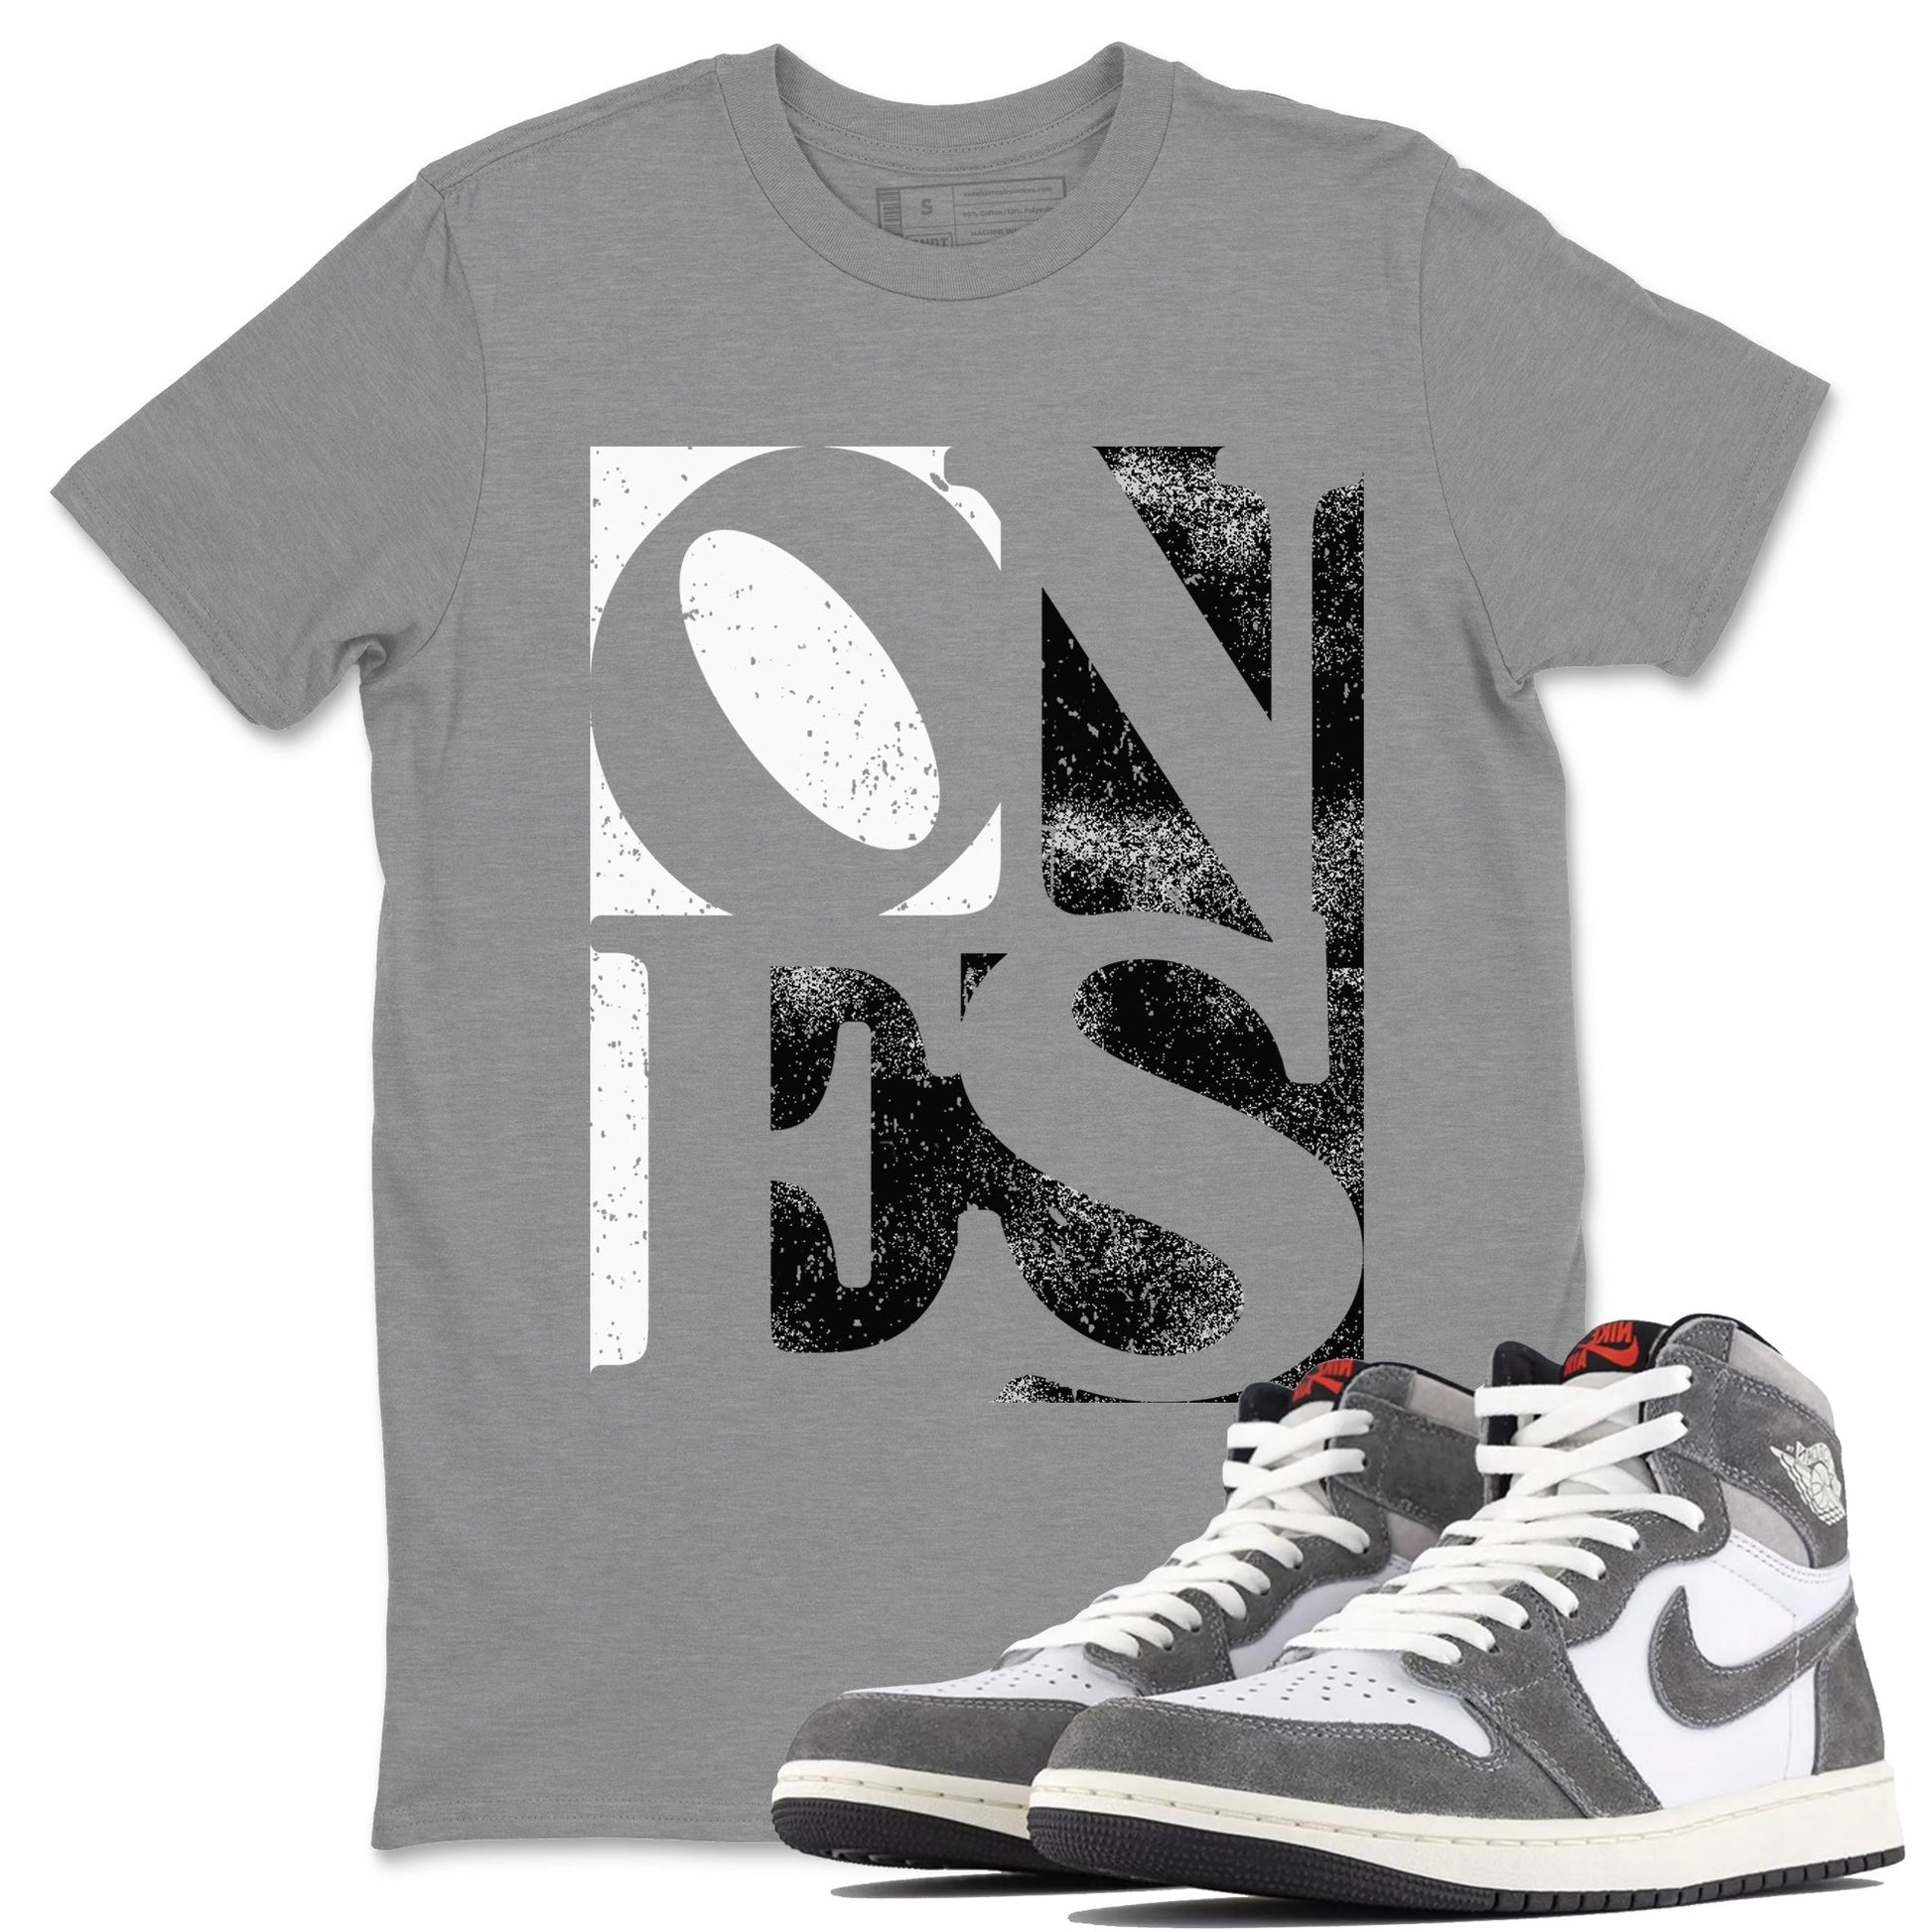 Air Jordan 1 Washed Heritage Ones Crew Neck Streetwear Sneaker Shirt Air Jordan 1 Washed Heritage Sneaker T-Shirts Size Chart